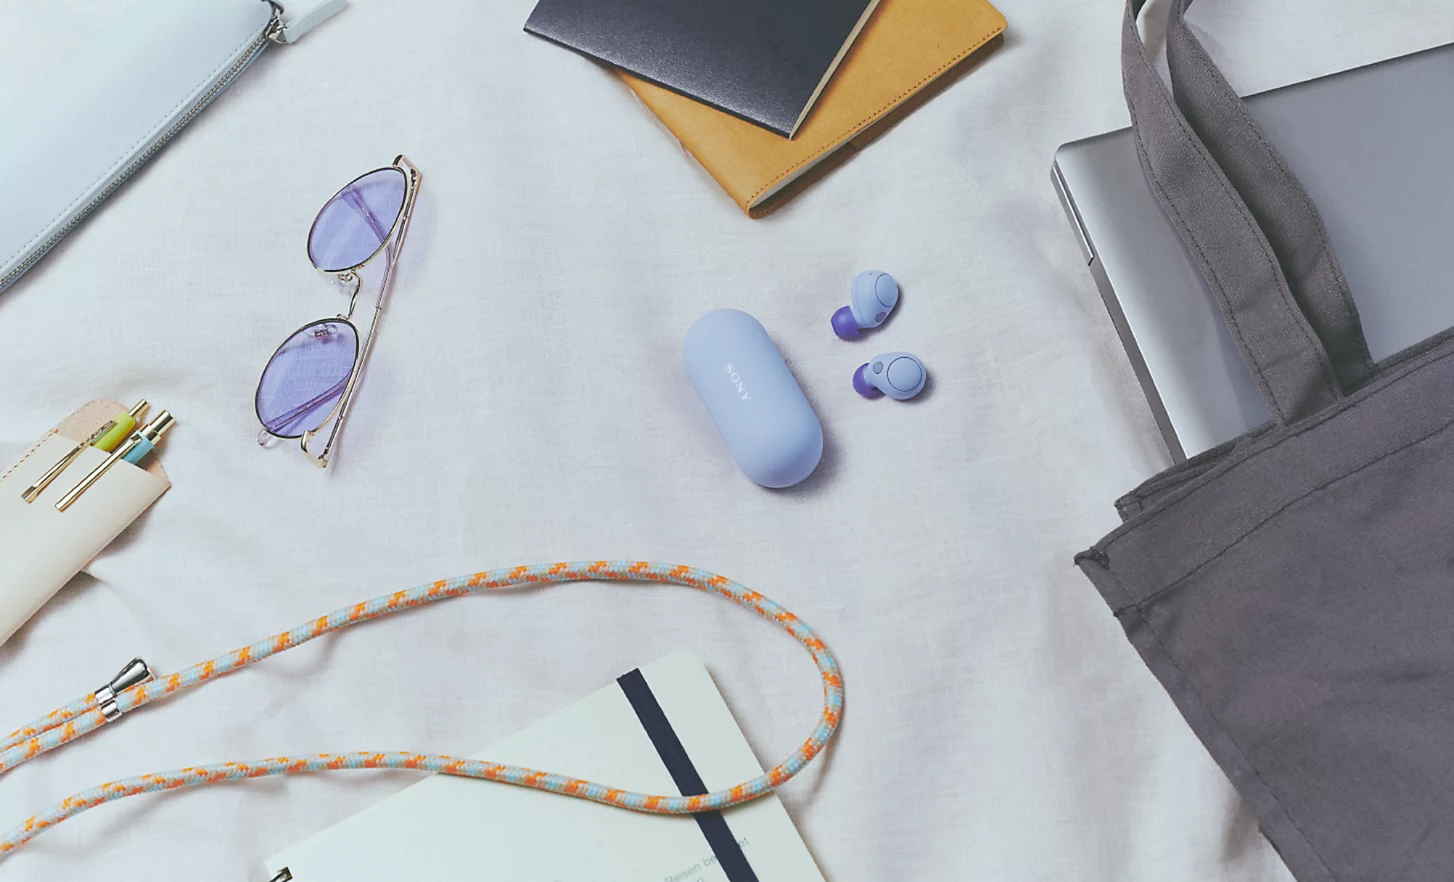 Image of the lavender WF-C700N headphones and case surrounded by various everyday items such as a laptop, bag and sunglasses